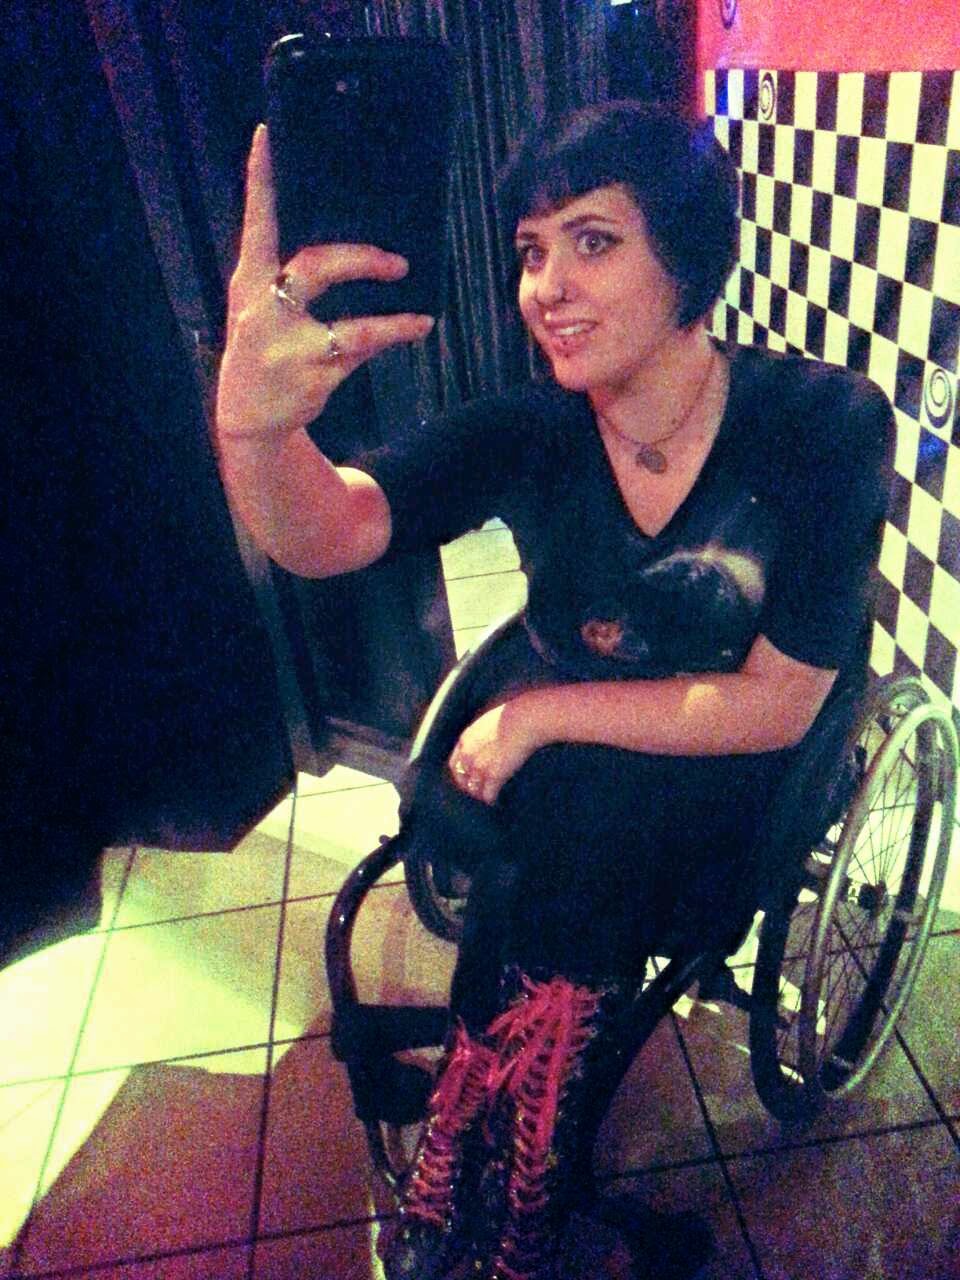 Woman with short black hair, wearing dark patterned clothes and tall boots with red laces, sitting in a a wheelchair, with hand up holding iPhone